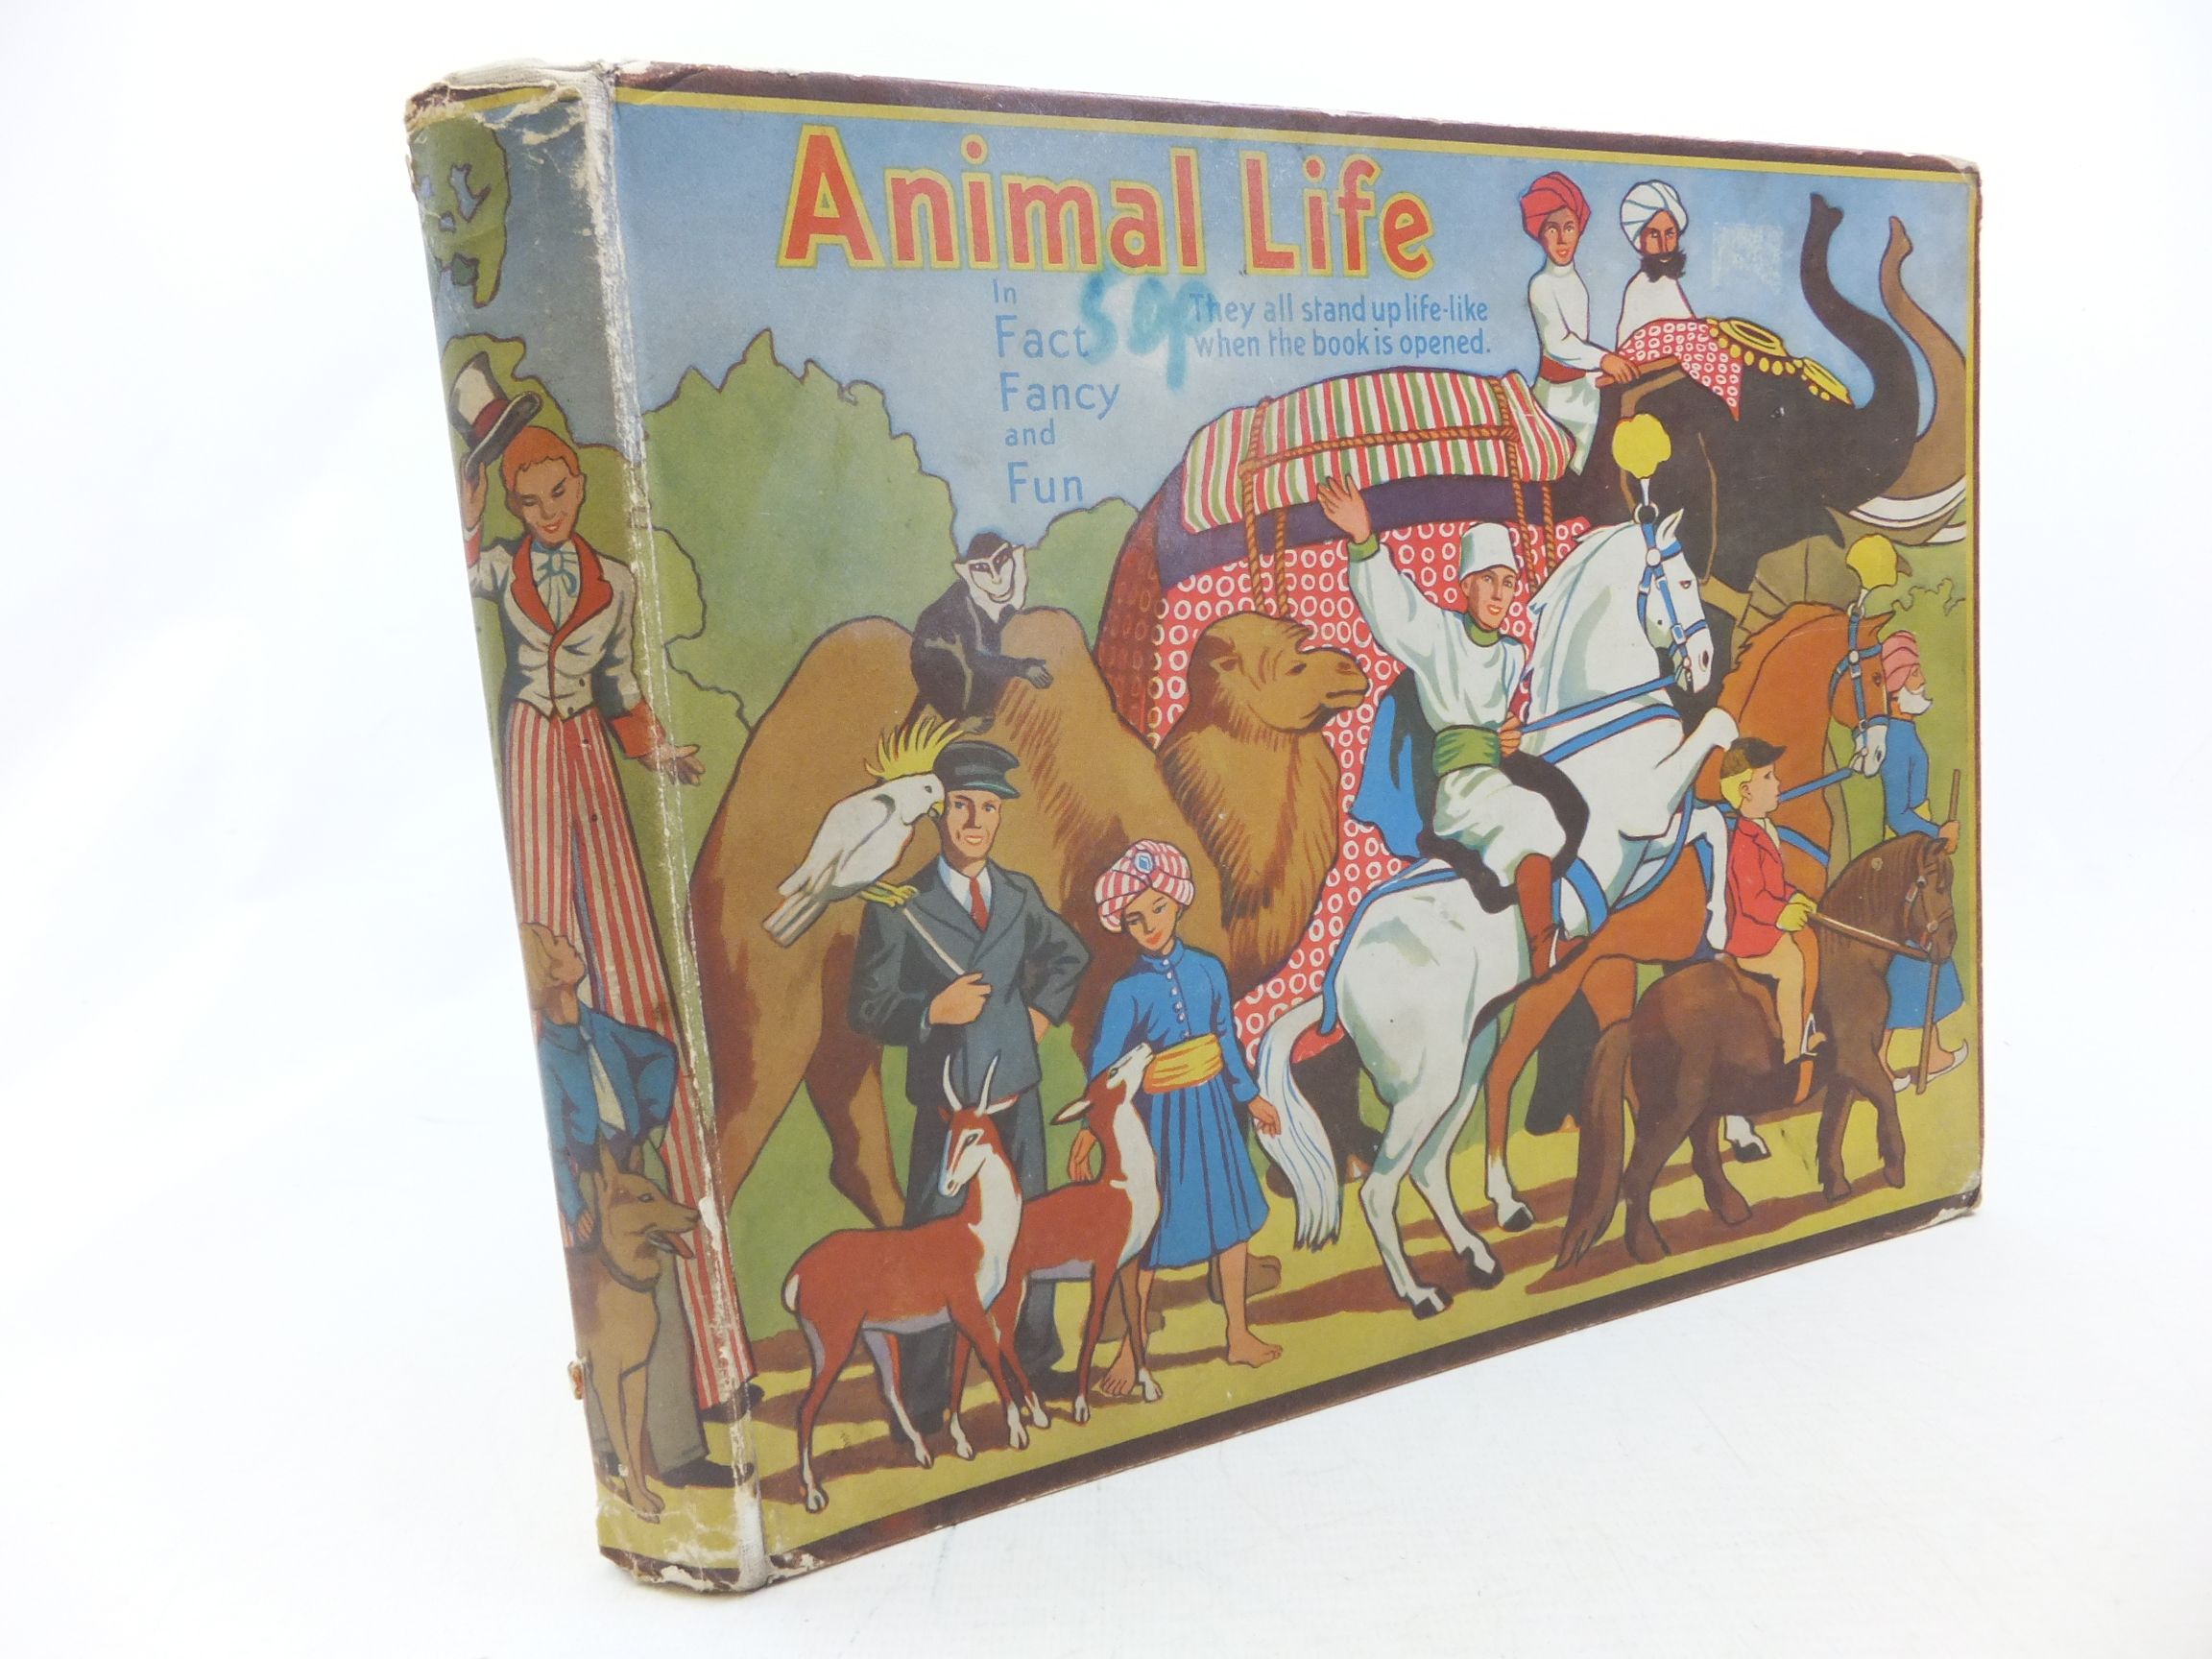 Photo of ANIMAL LIFE IN FACT, FANCY AND FUN written by Giraud, S. Louis published by Daily Sketch & Sunday Graphic Ltd. (STOCK CODE: 2114240)  for sale by Stella & Rose's Books